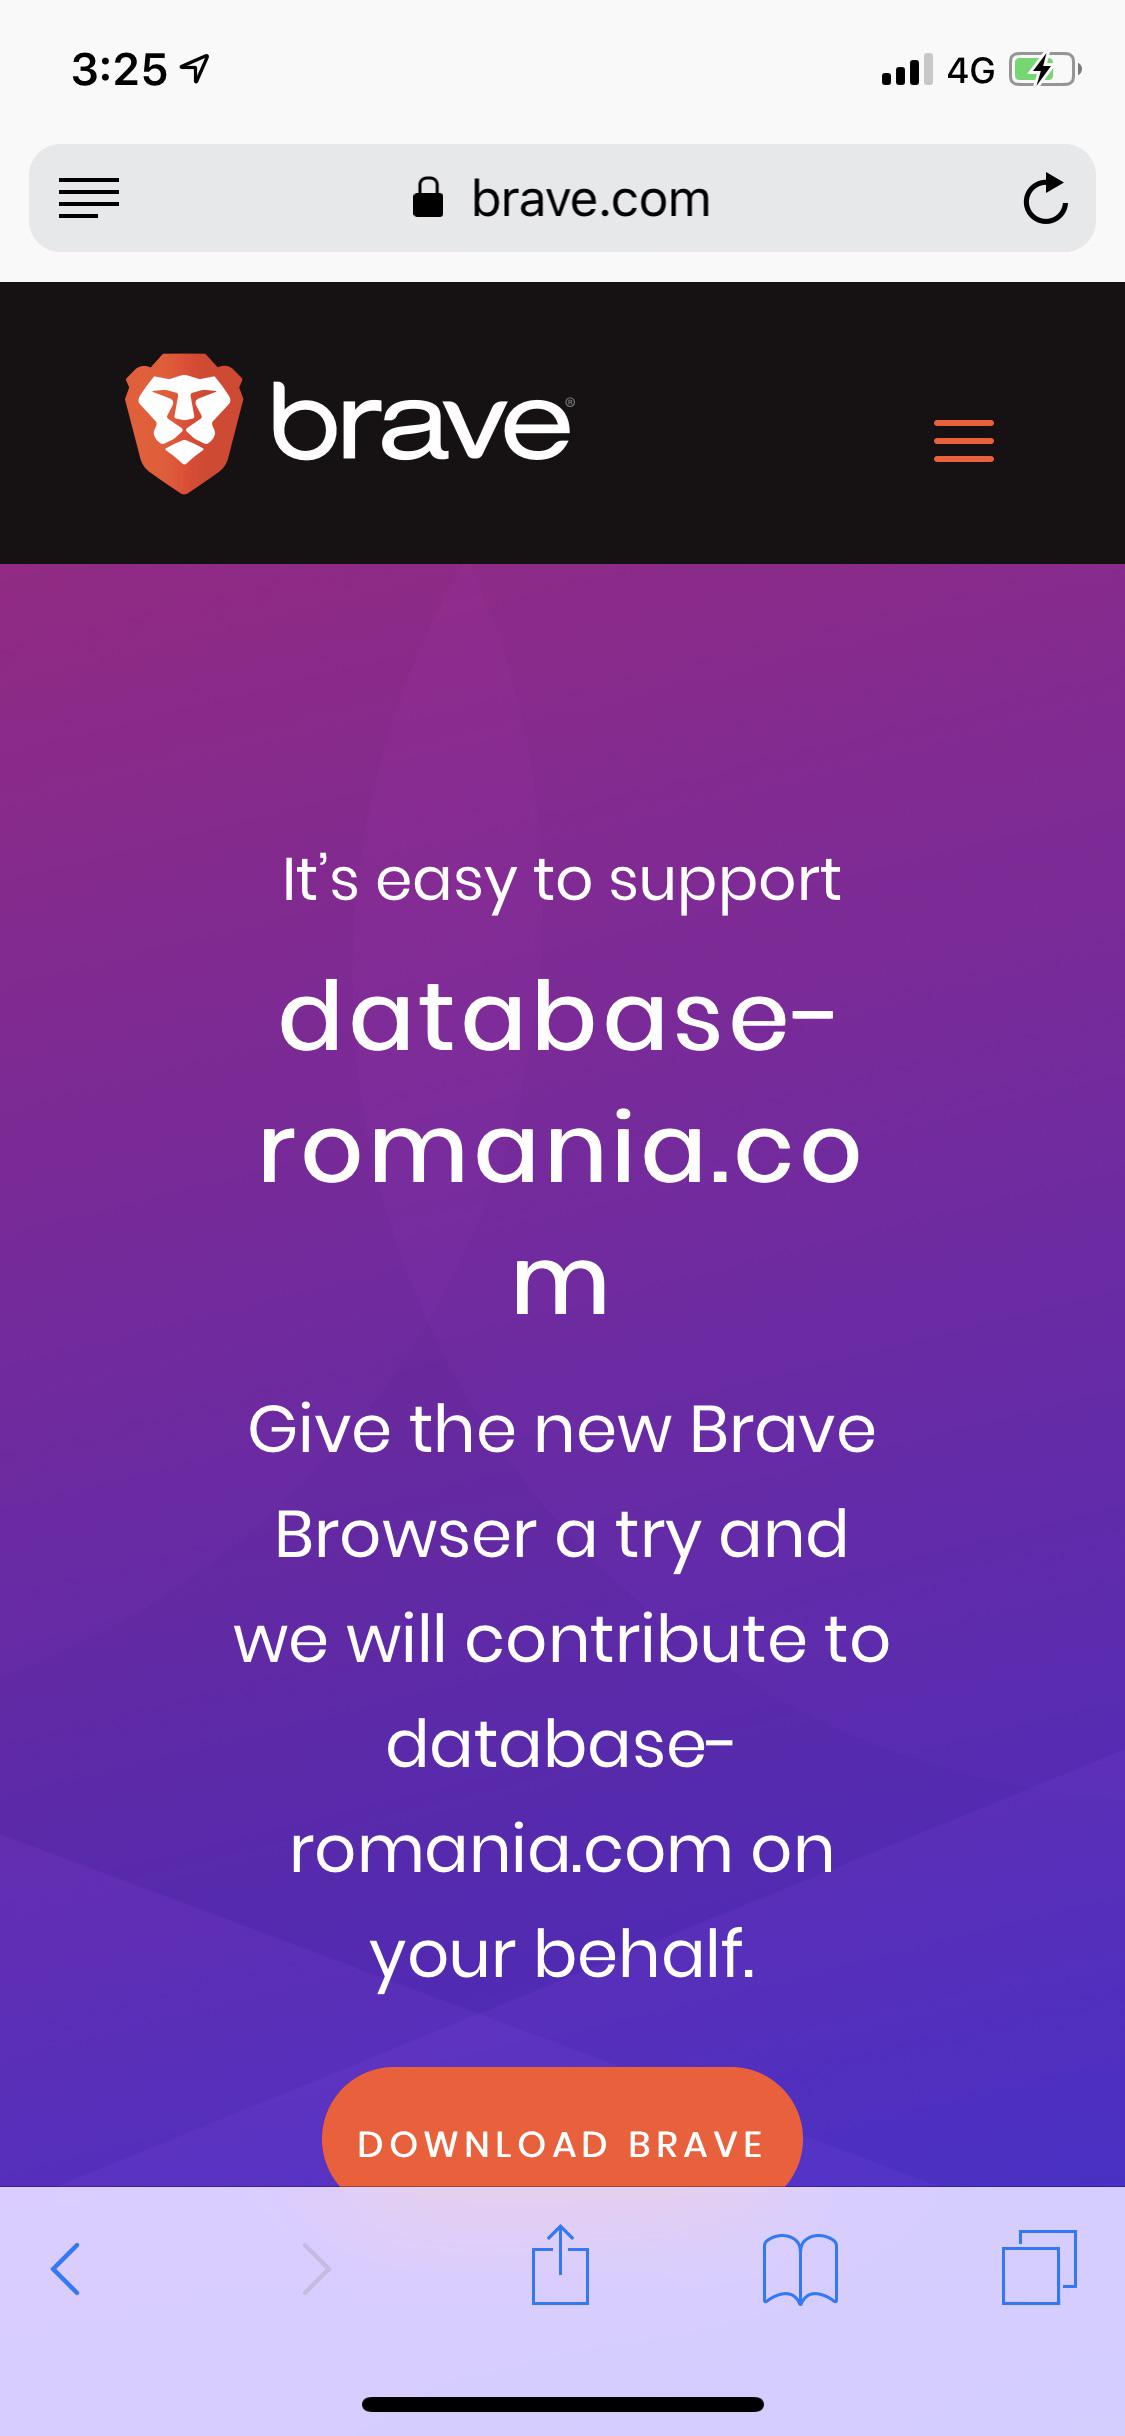 brave web browser problems review